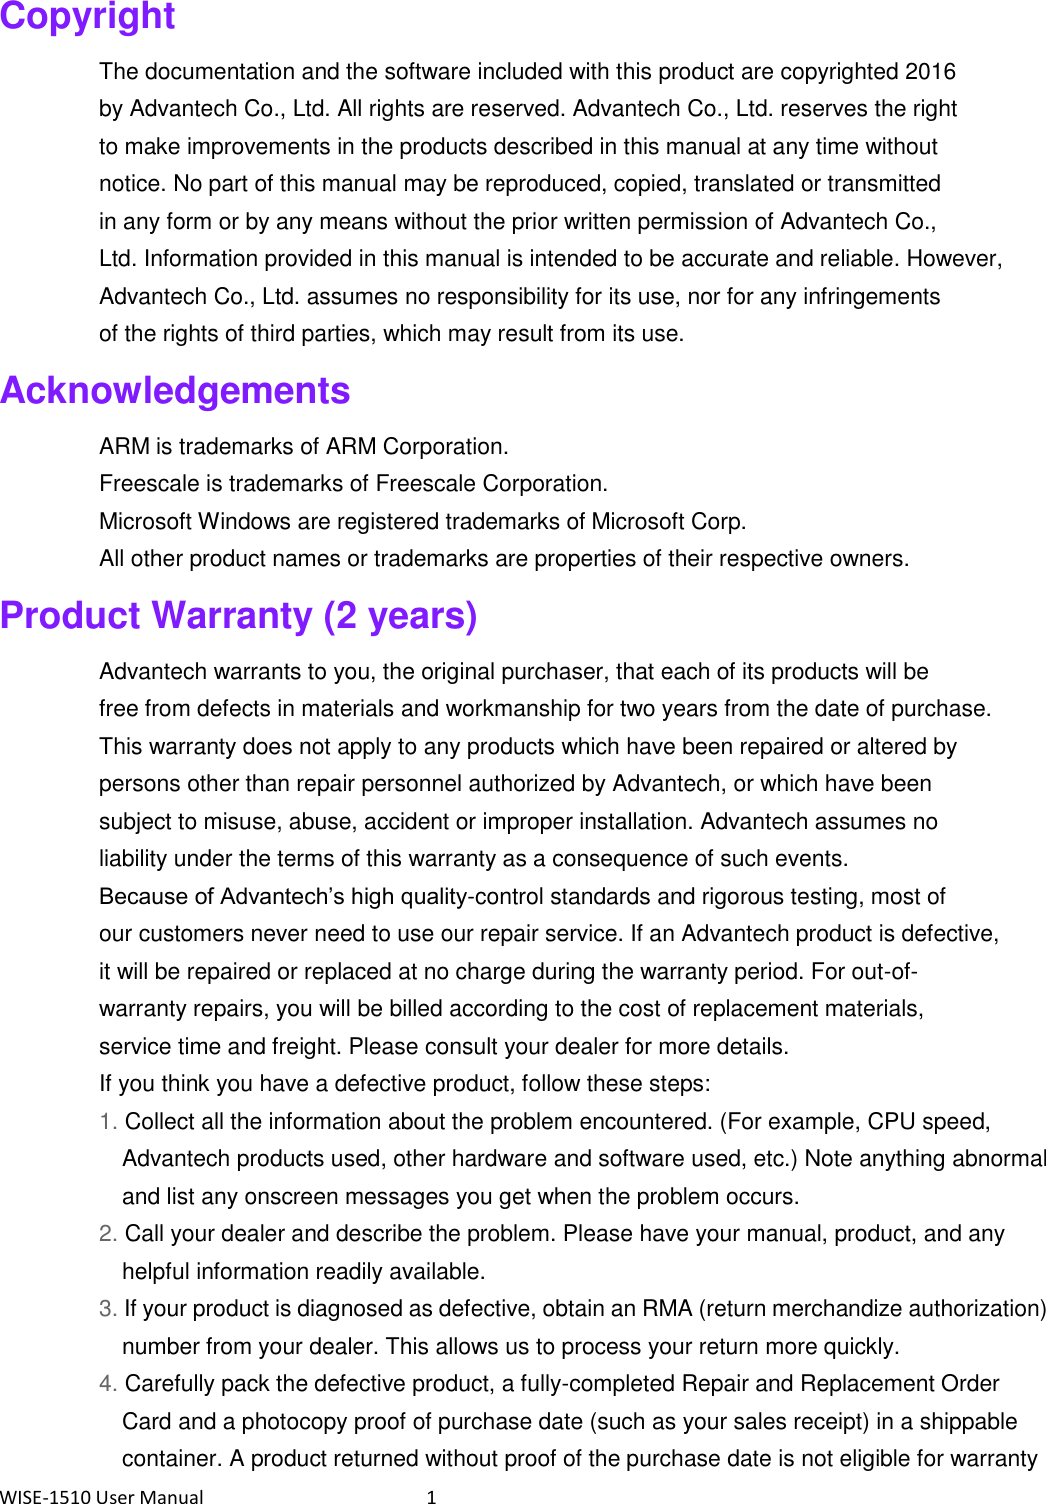 WISE-1510 User Manual  1 Copyright The documentation and the software included with this product are copyrighted 2016 by Advantech Co., Ltd. All rights are reserved. Advantech Co., Ltd. reserves the right to make improvements in the products described in this manual at any time without notice. No part of this manual may be reproduced, copied, translated or transmitted in any form or by any means without the prior written permission of Advantech Co., Ltd. Information provided in this manual is intended to be accurate and reliable. However, Advantech Co., Ltd. assumes no responsibility for its use, nor for any infringements of the rights of third parties, which may result from its use. Acknowledgements ARM is trademarks of ARM Corporation. Freescale is trademarks of Freescale Corporation. Microsoft Windows are registered trademarks of Microsoft Corp. All other product names or trademarks are properties of their respective owners. Product Warranty (2 years) Advantech warrants to you, the original purchaser, that each of its products will be free from defects in materials and workmanship for two years from the date of purchase. This warranty does not apply to any products which have been repaired or altered by persons other than repair personnel authorized by Advantech, or which have been subject to misuse, abuse, accident or improper installation. Advantech assumes no liability under the terms of this warranty as a consequence of such events. Because of Advantech’s high quality-control standards and rigorous testing, most of our customers never need to use our repair service. If an Advantech product is defective, it will be repaired or replaced at no charge during the warranty period. For out-of- warranty repairs, you will be billed according to the cost of replacement materials, service time and freight. Please consult your dealer for more details. If you think you have a defective product, follow these steps: 1. Collect all the information about the problem encountered. (For example, CPU speed, Advantech products used, other hardware and software used, etc.) Note anything abnormal and list any onscreen messages you get when the problem occurs. 2. Call your dealer and describe the problem. Please have your manual, product, and any helpful information readily available. 3. If your product is diagnosed as defective, obtain an RMA (return merchandize authorization) number from your dealer. This allows us to process your return more quickly. 4. Carefully pack the defective product, a fully-completed Repair and Replacement Order Card and a photocopy proof of purchase date (such as your sales receipt) in a shippable container. A product returned without proof of the purchase date is not eligible for warranty 